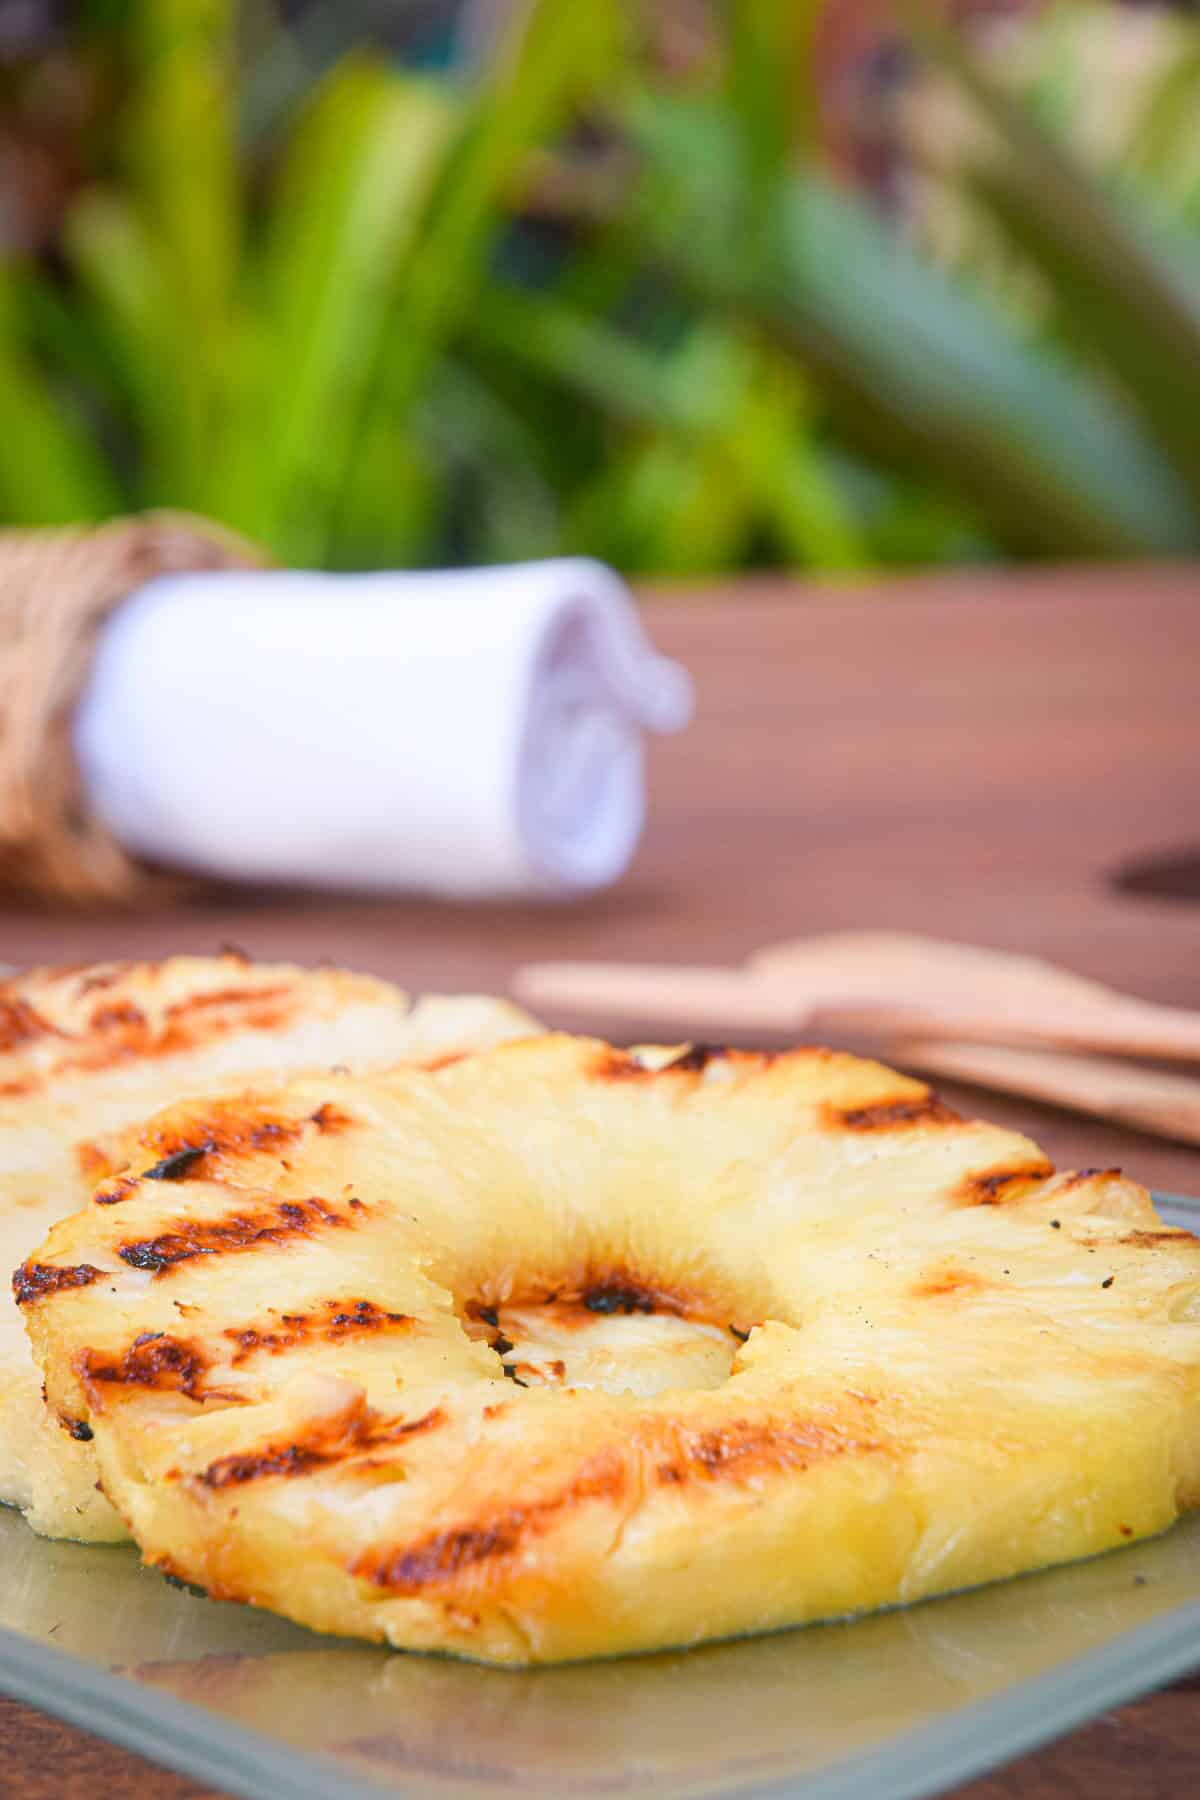 Grilled pineapple slices on glass serving dish.